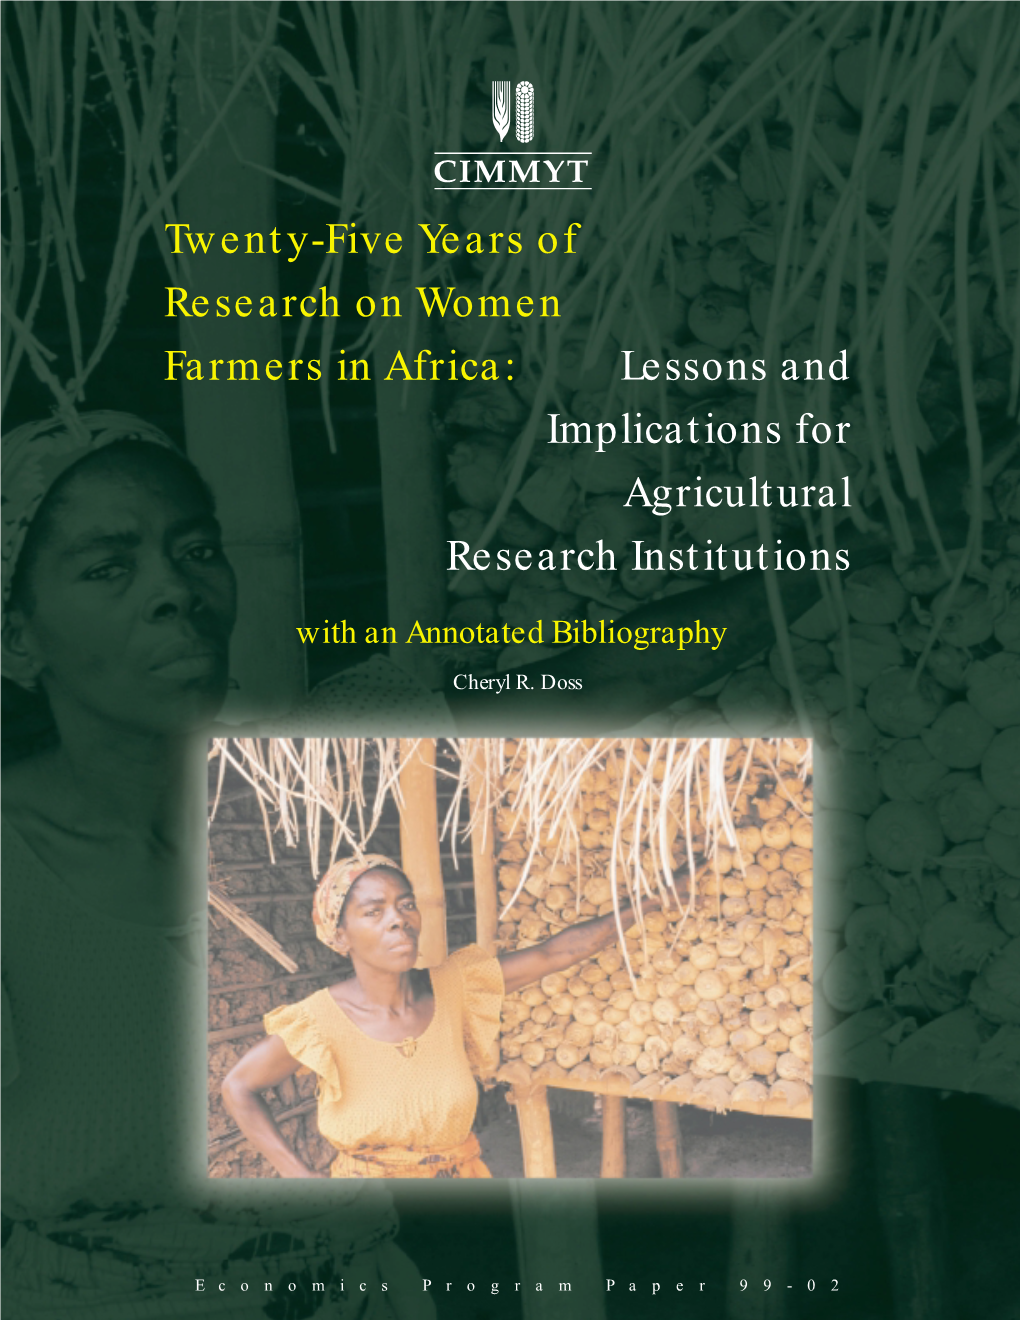 Twenty-Five Years of Research on Women Farmers in Africa: Lessons and Implications for Agricultural Research Institutions